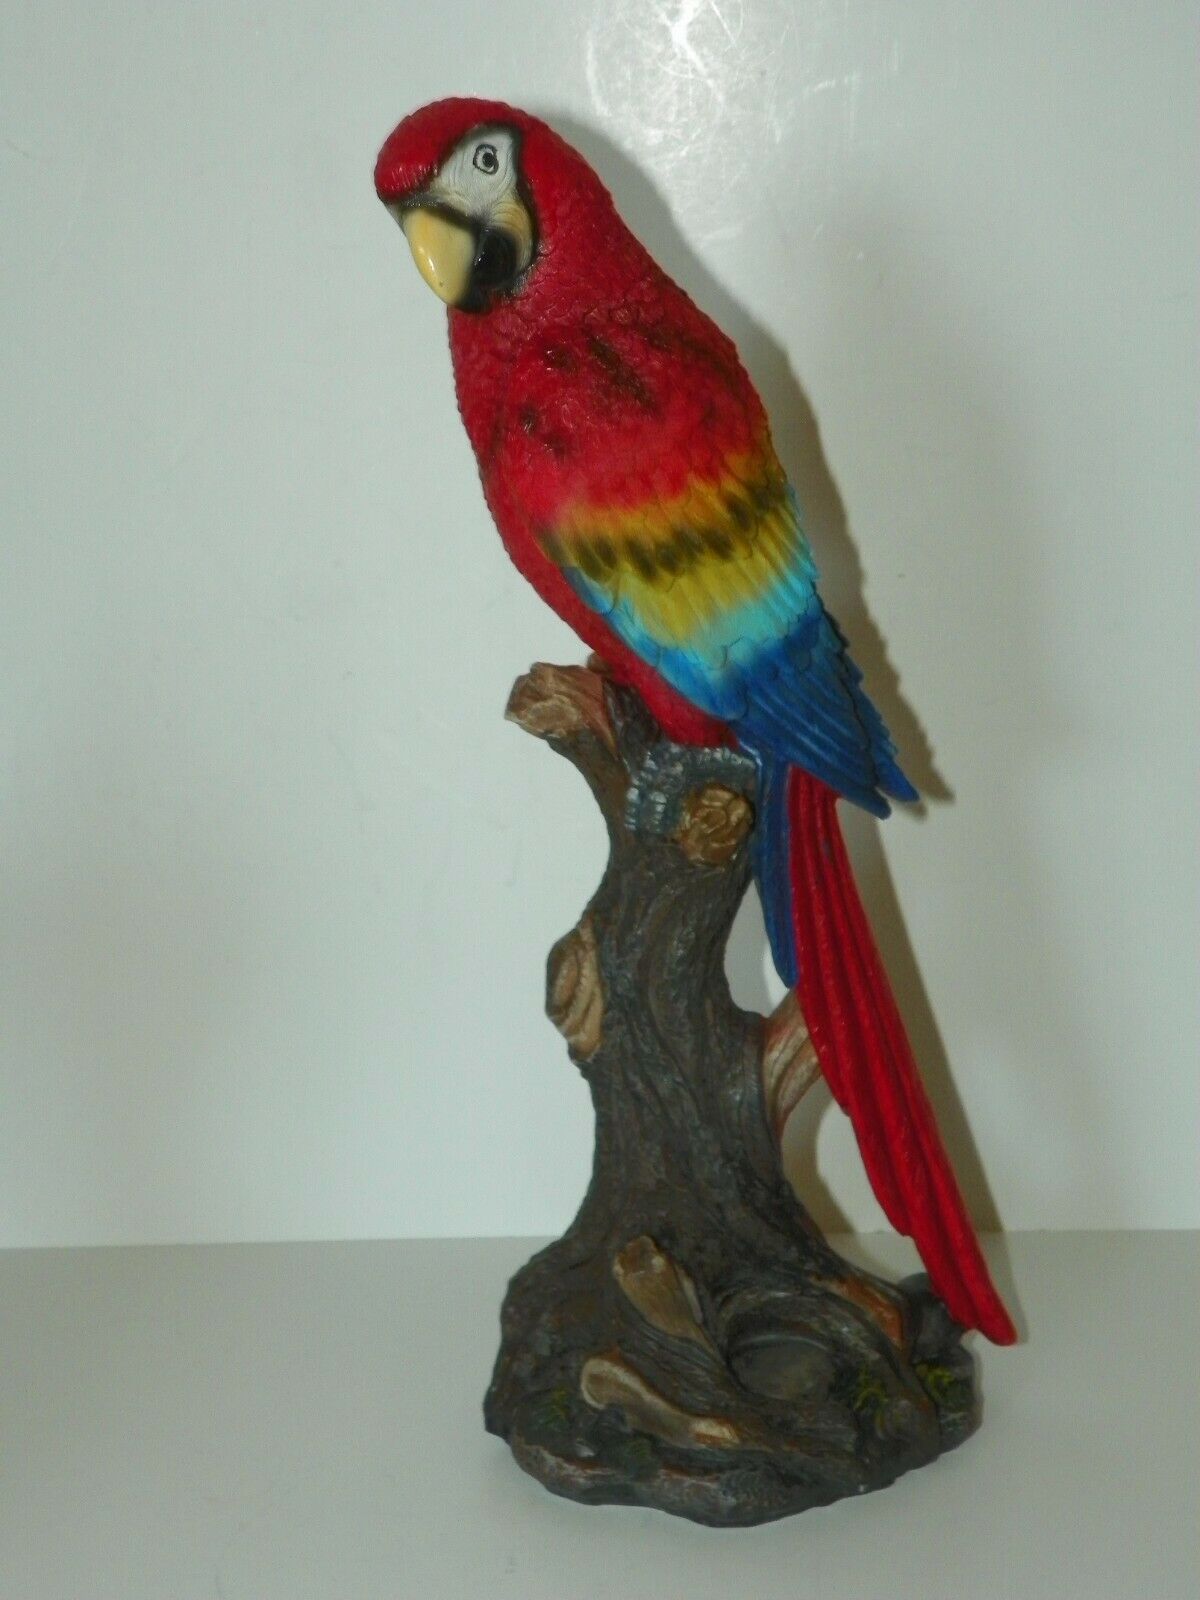 Lifelike Colorful Resin Parrot Figure On Branch 14" Tall Statue